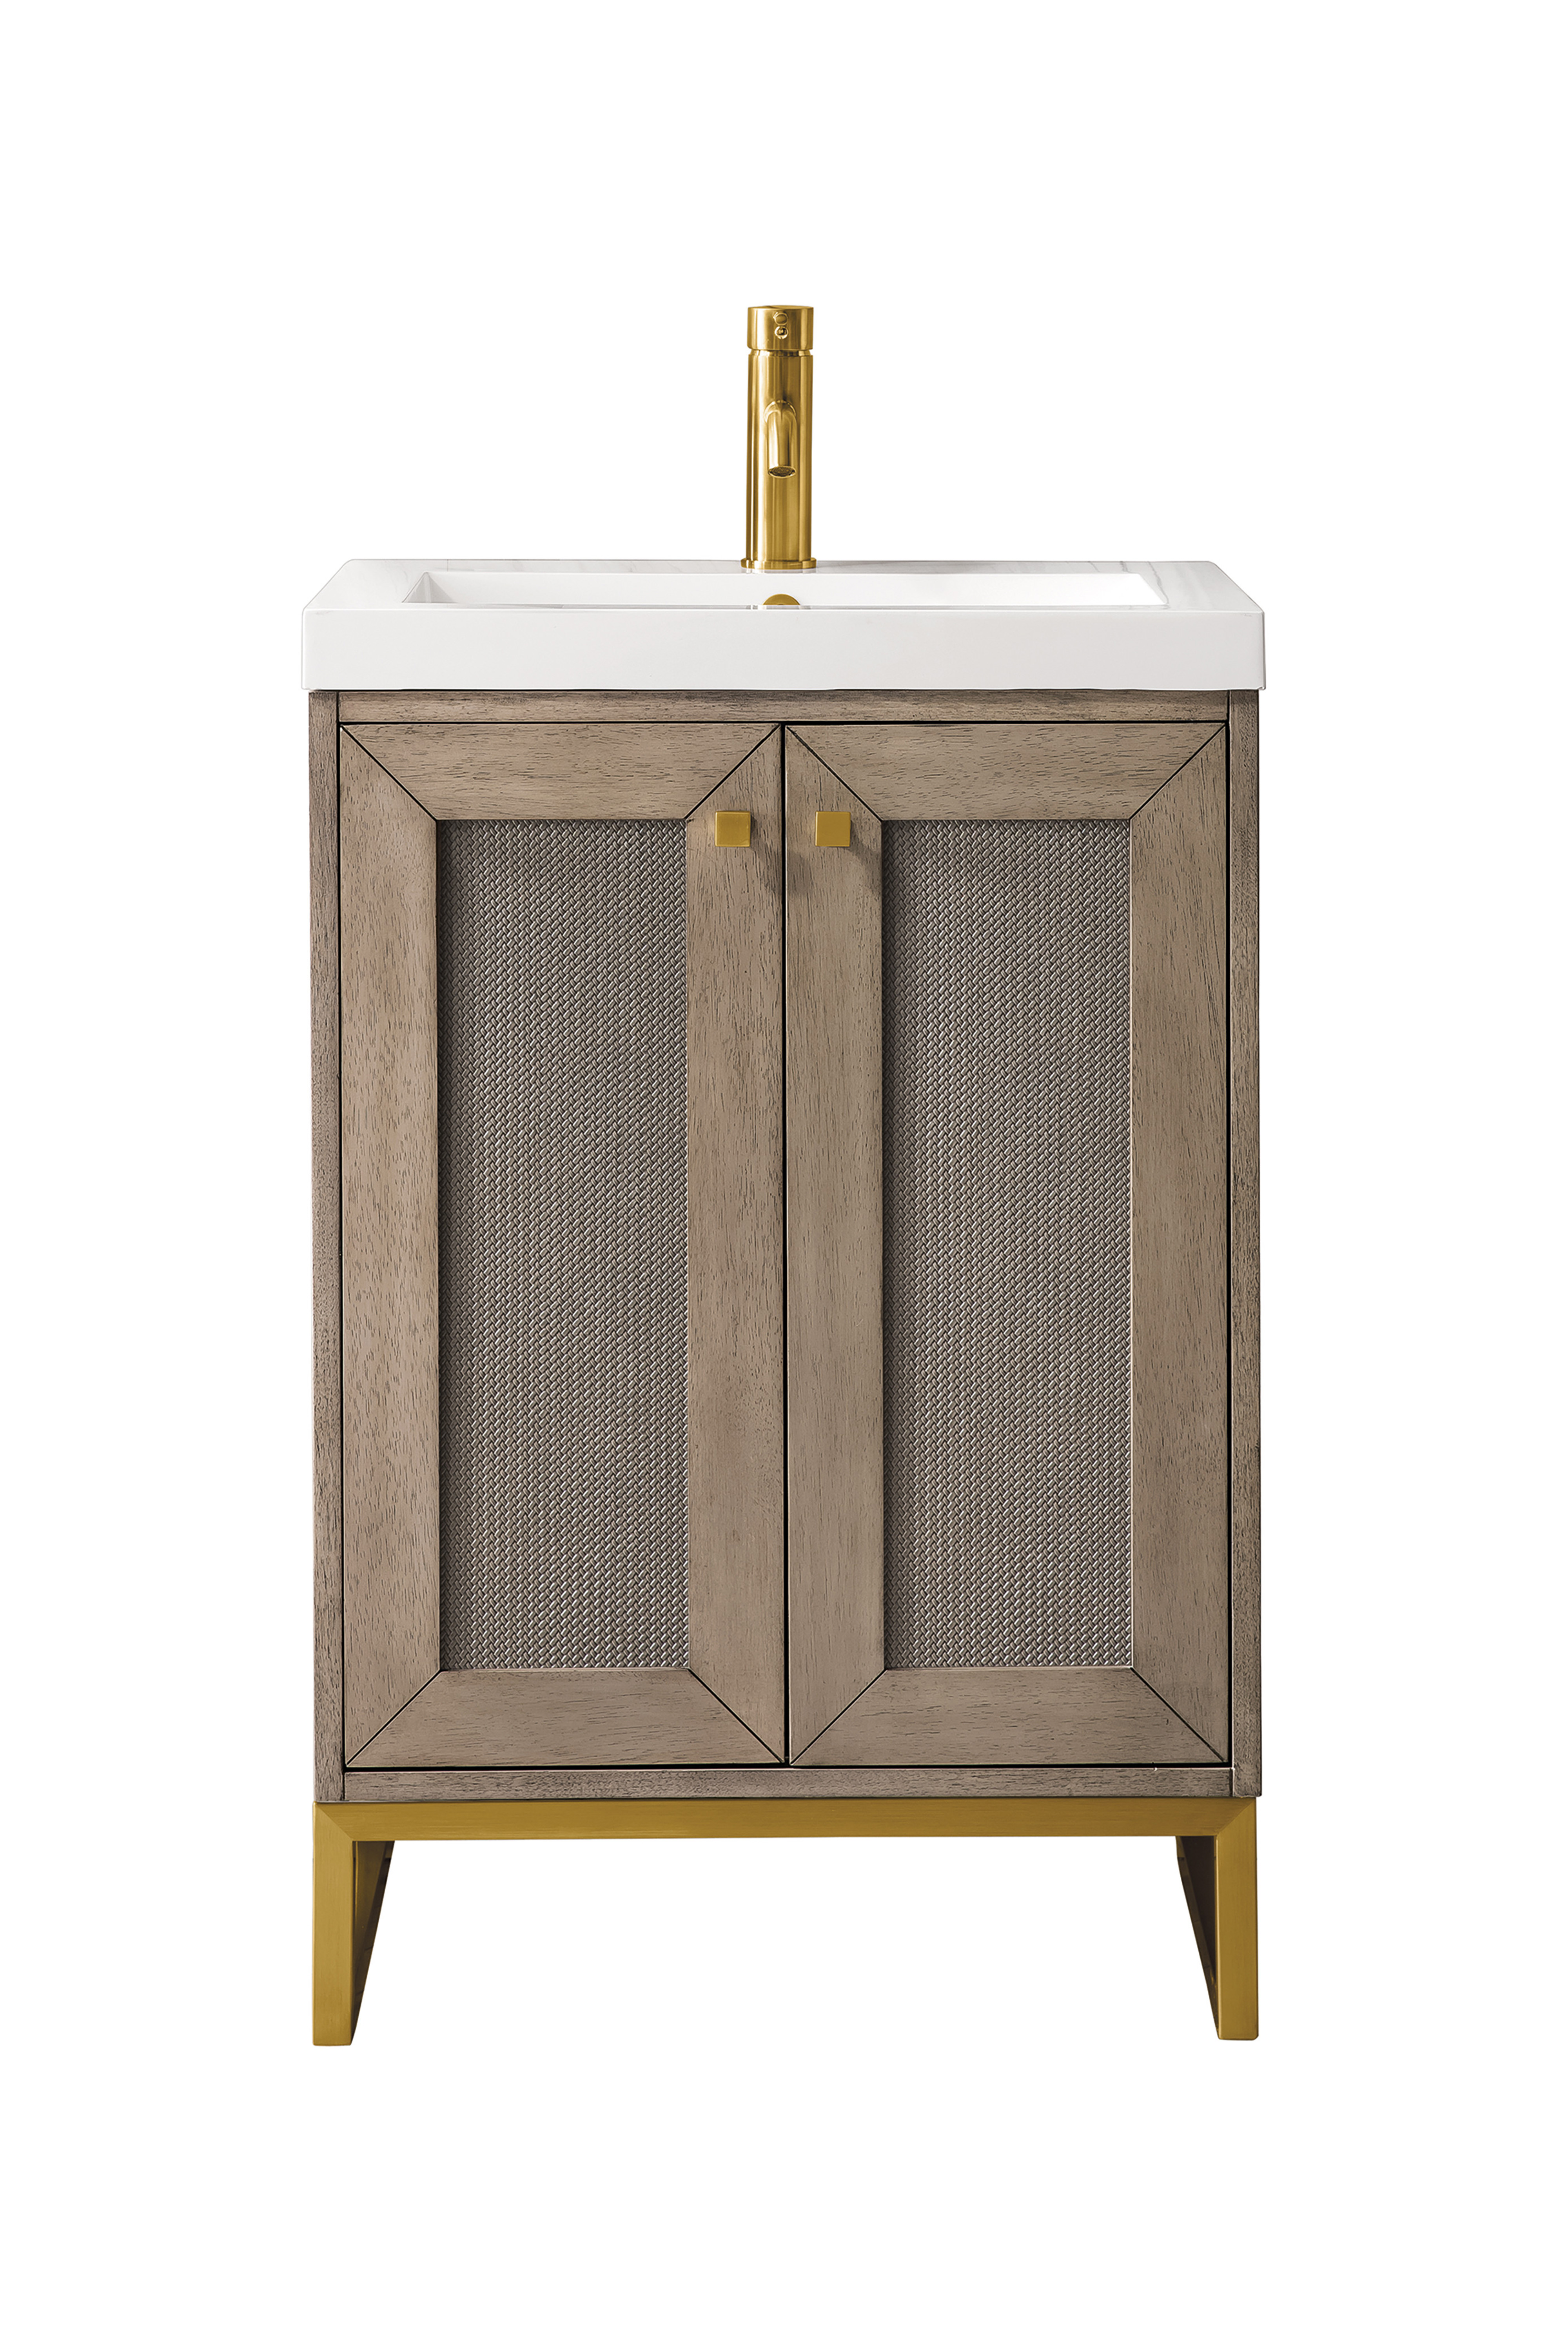 James Martin E303V24WWRGDWG Chianti 24" Single Vanity Cabinet, Whitewashed Walnut, Radiant Gold, w/ White Glossy Composite Countertop